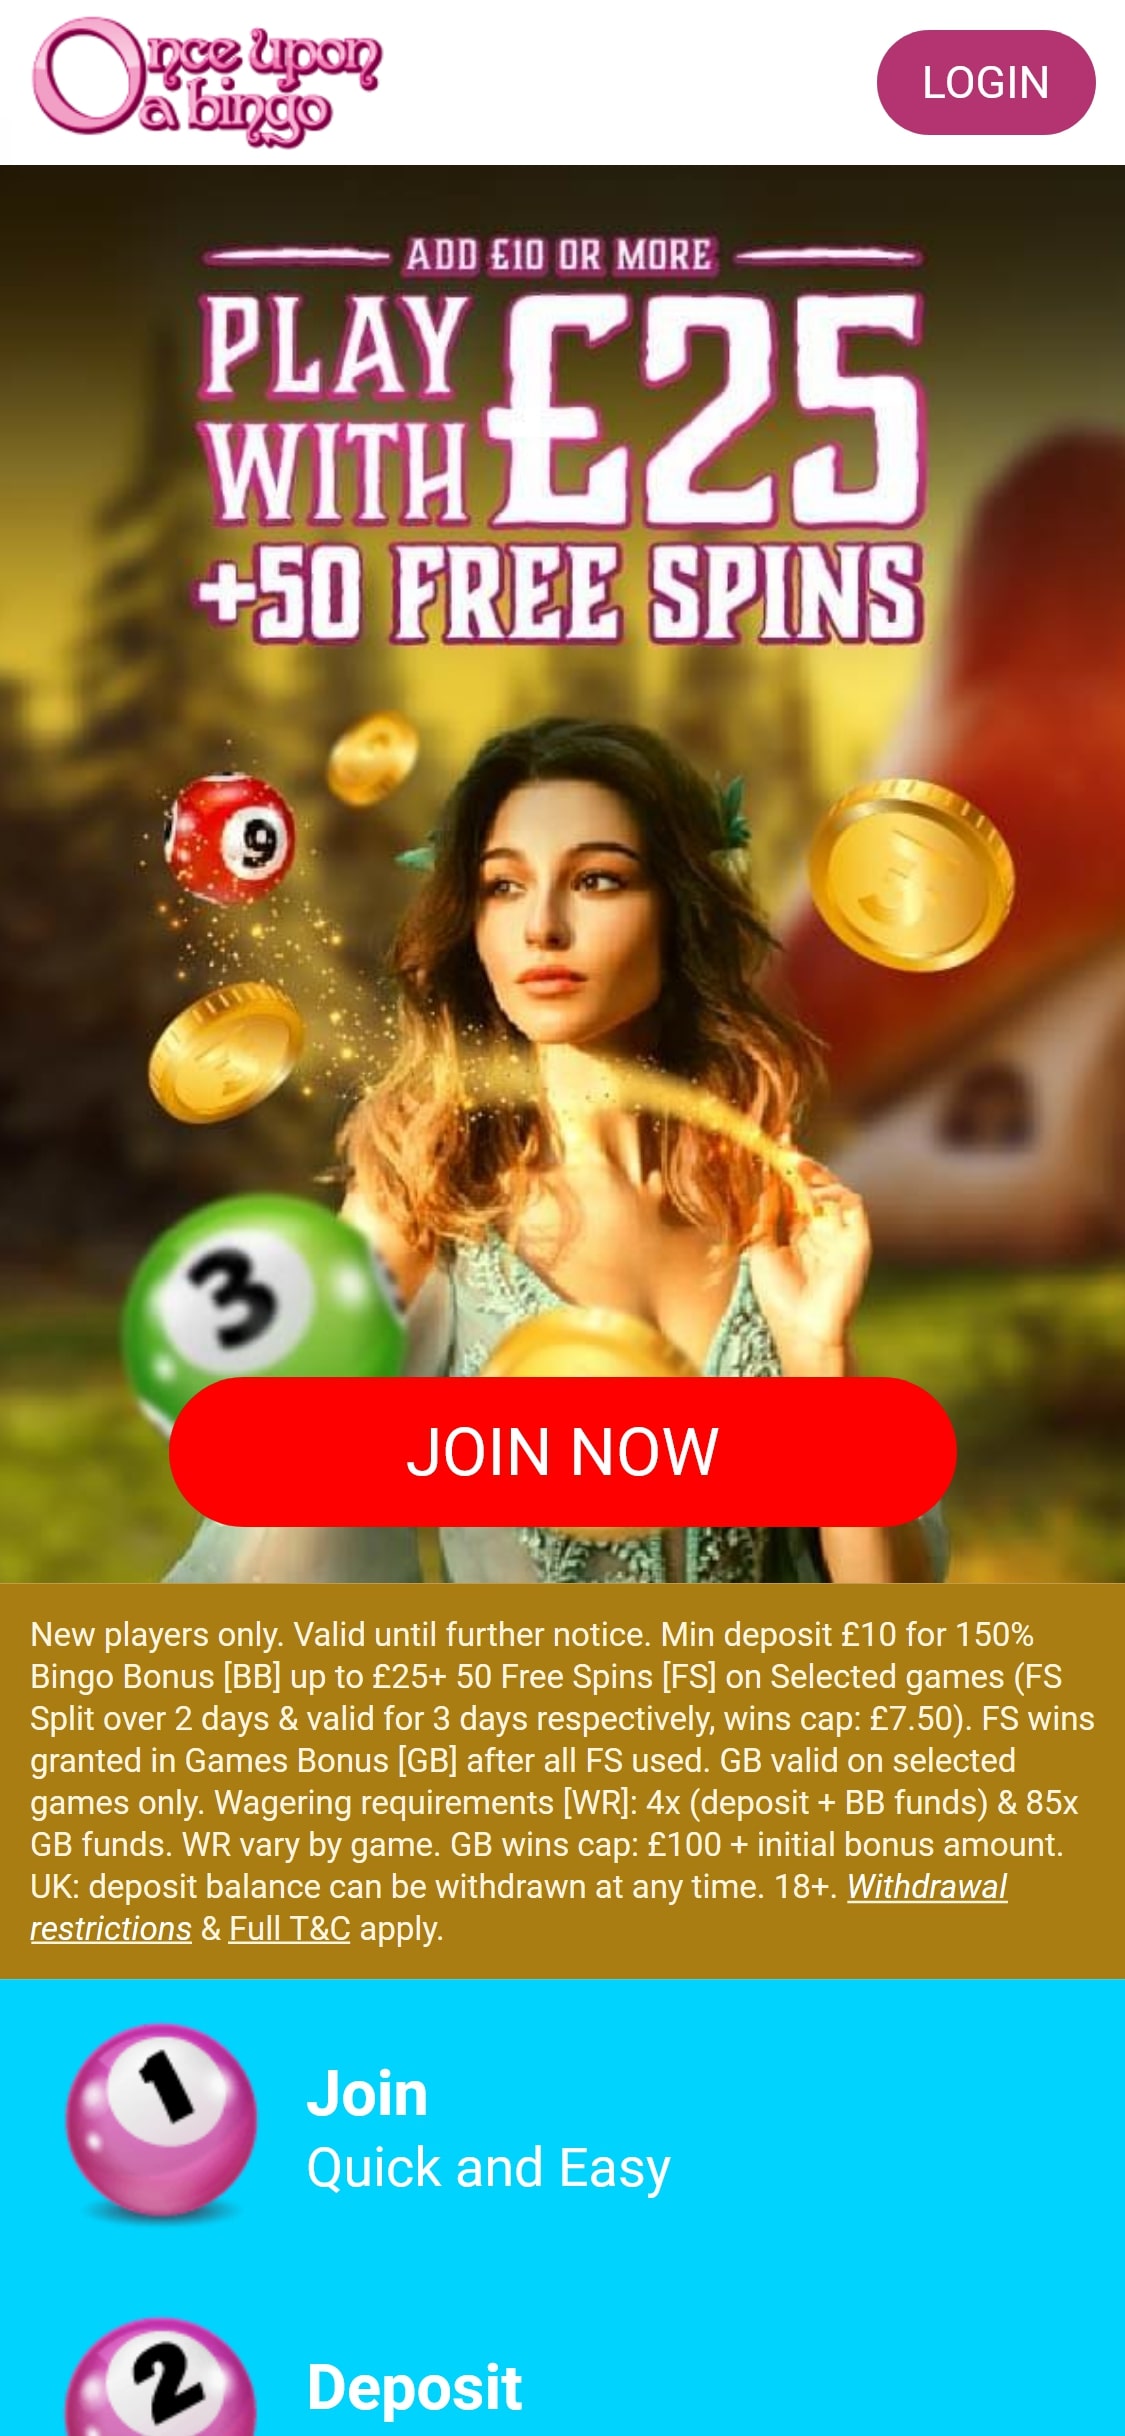 Once Upon a Bingo Casino Mobile Review